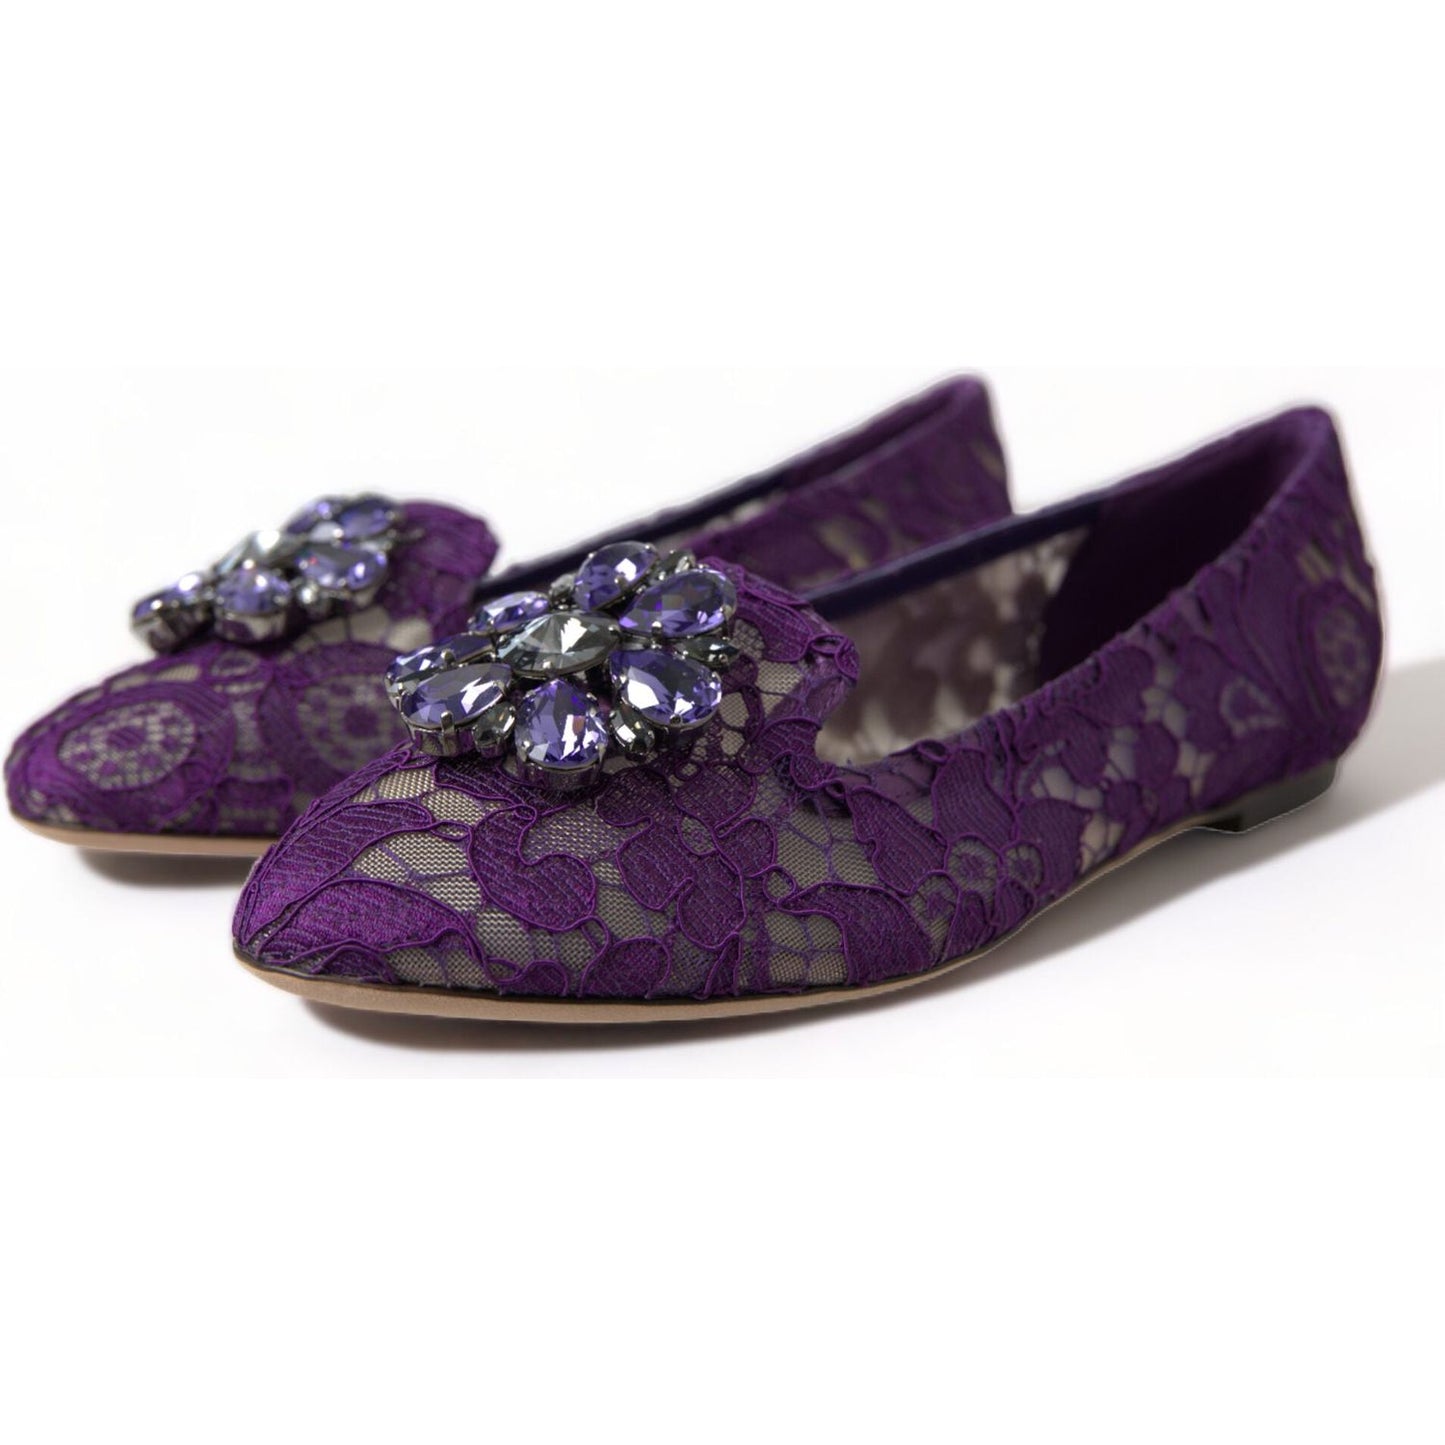 Dolce & Gabbana Elegant Floral Lace Vally Flat Shoes purple-vally-taormina-lace-crystals-flats-shoes 465A9040-bg-scaled-2031cafc-02e.jpg